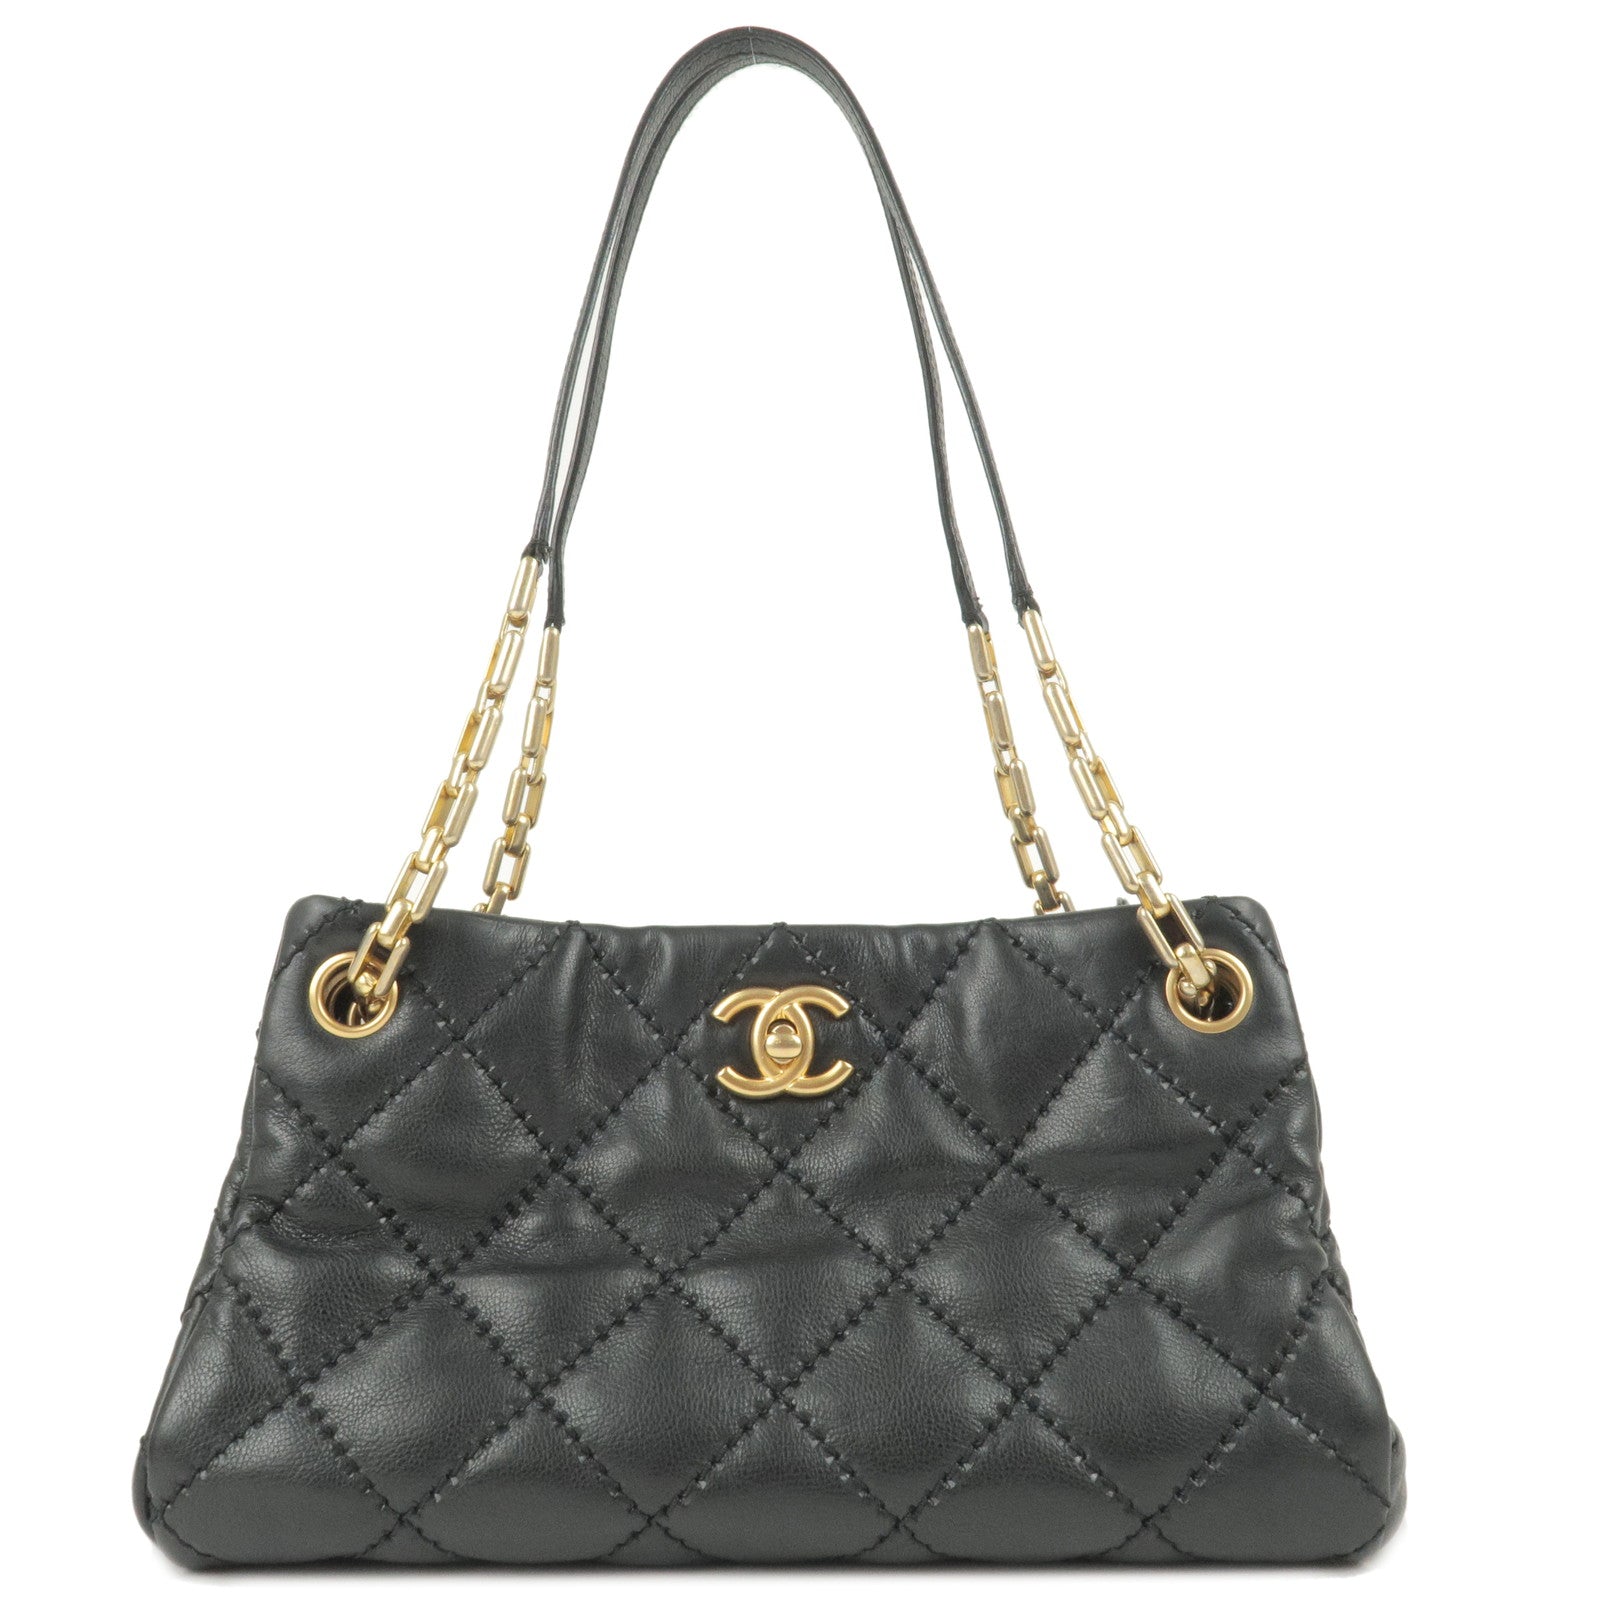 CHANEL  BLACK QUILTED LEATHER CHAIN SHOULDER